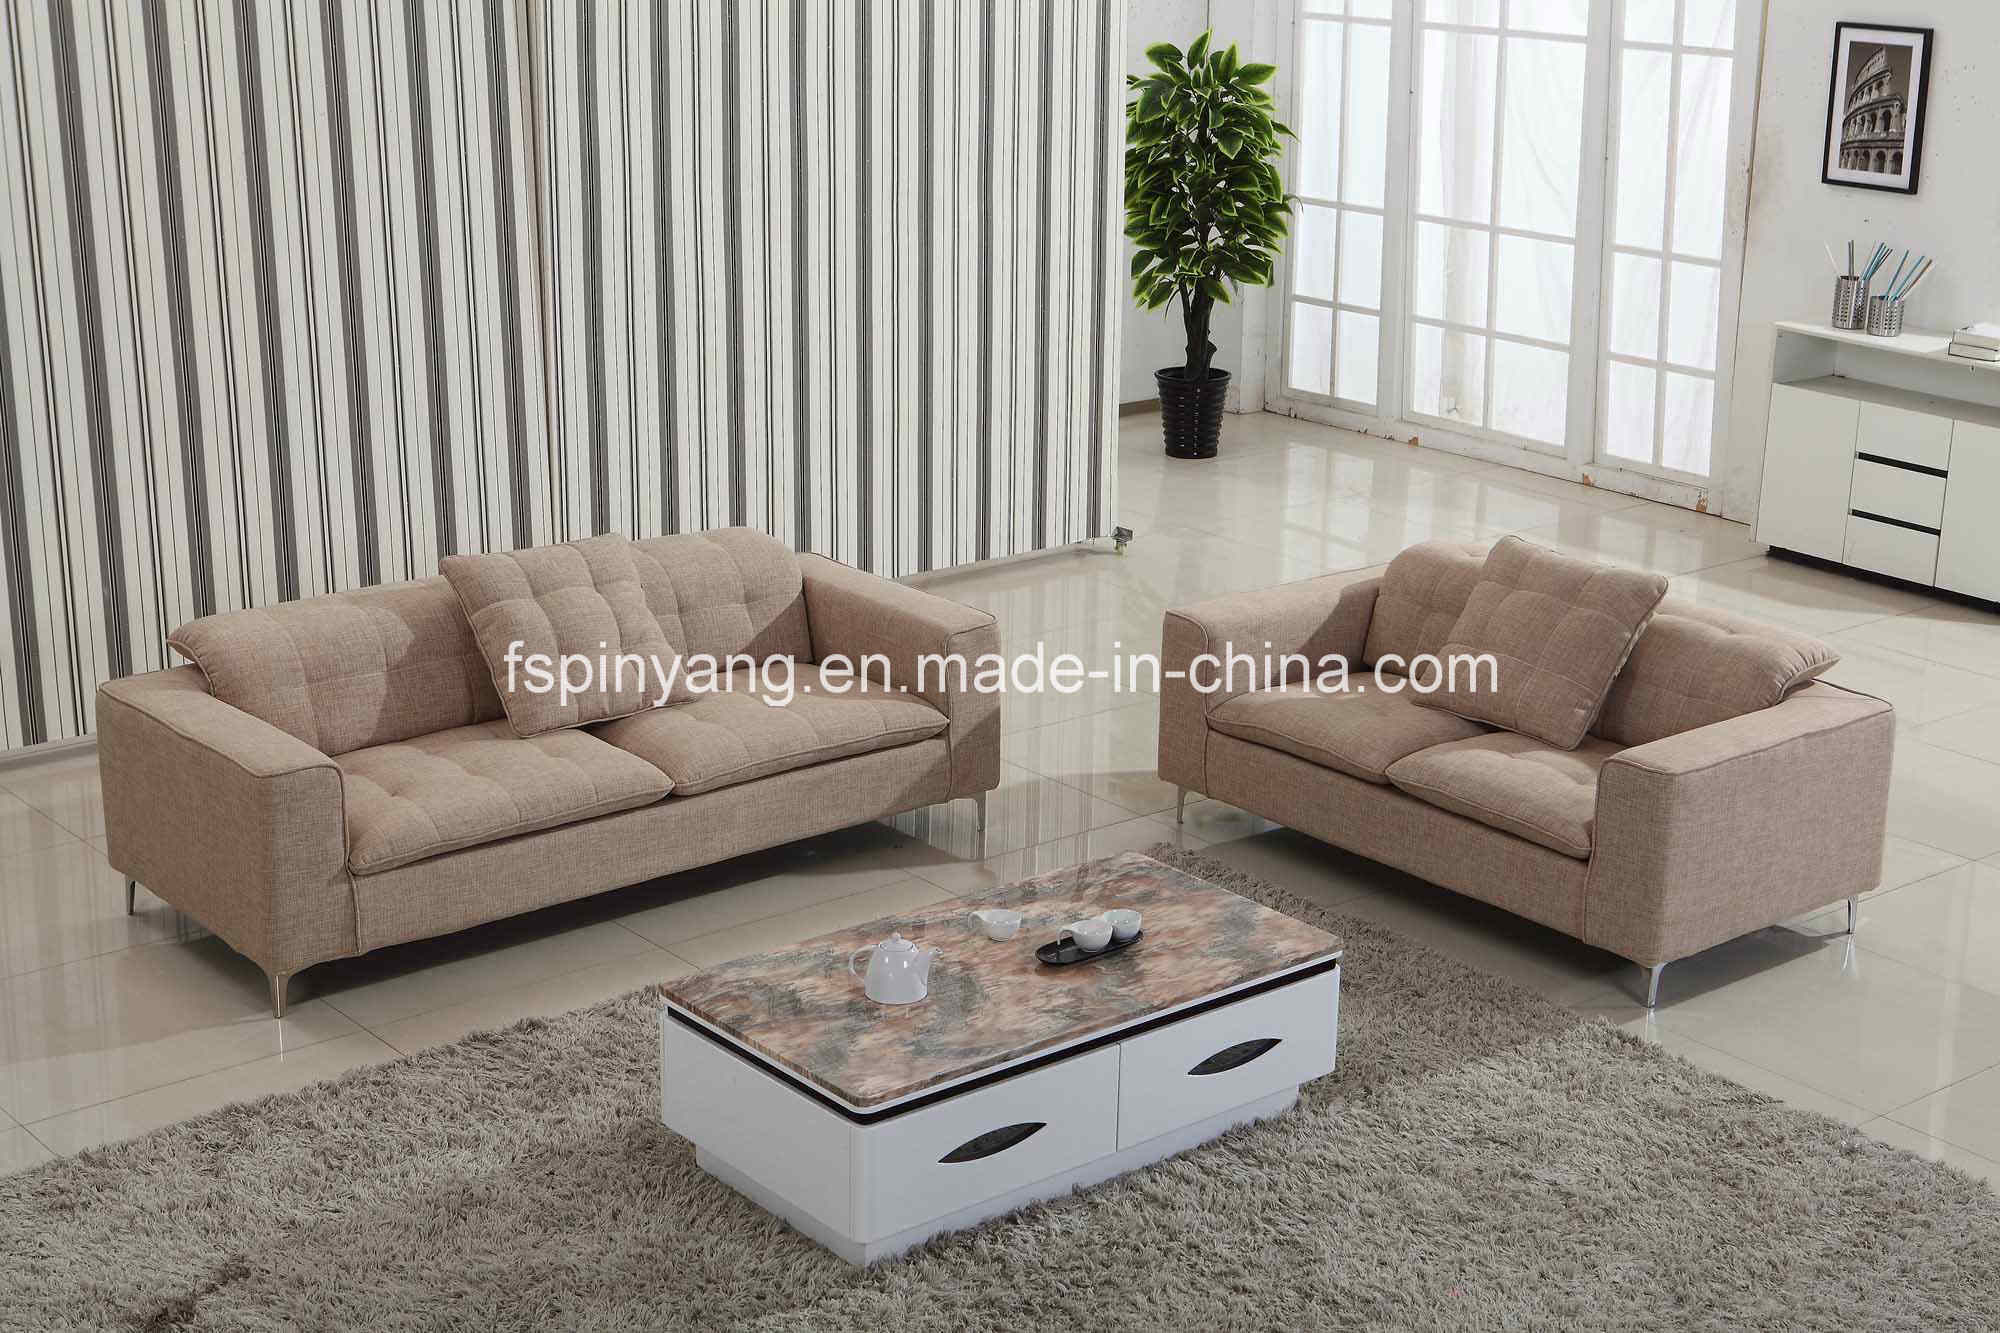 Pinyang New Design European Style 3 Seater Fabric Sofa Af1303